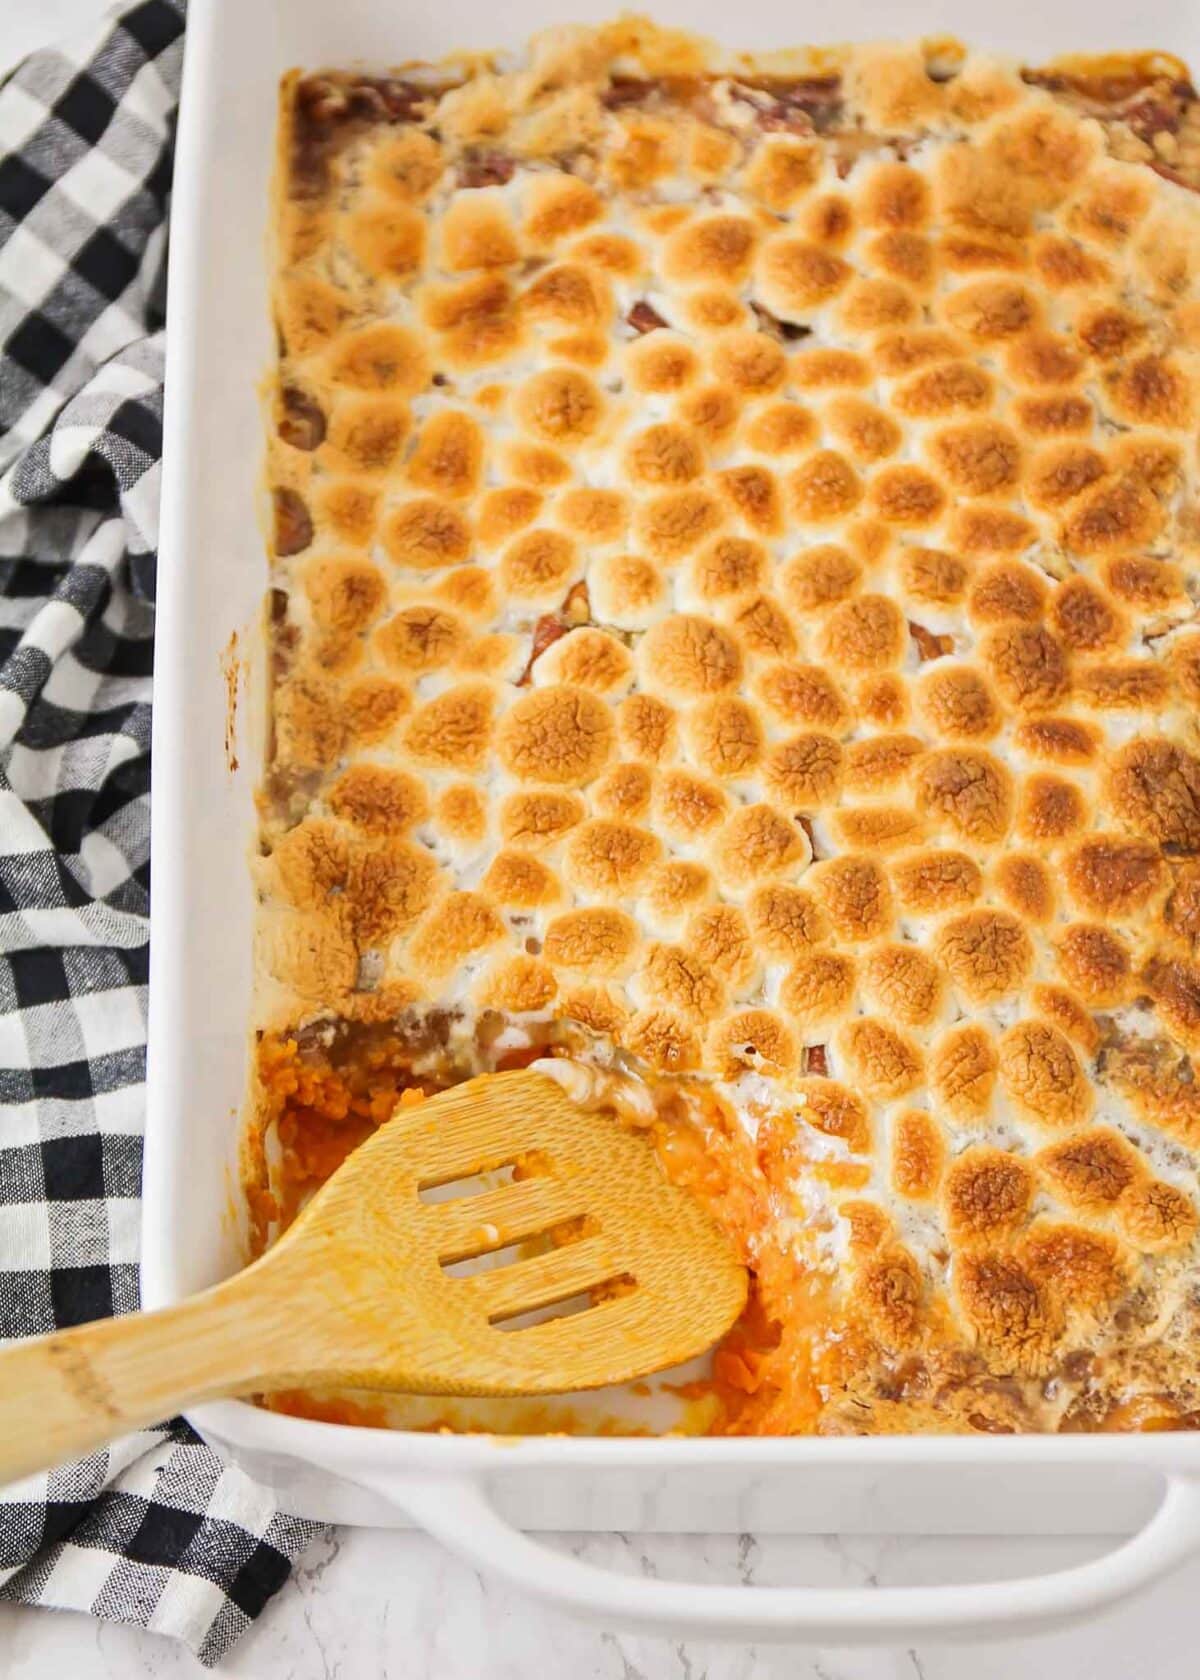 Baked sweet potato casserole with marshmallows with a scoop missing.